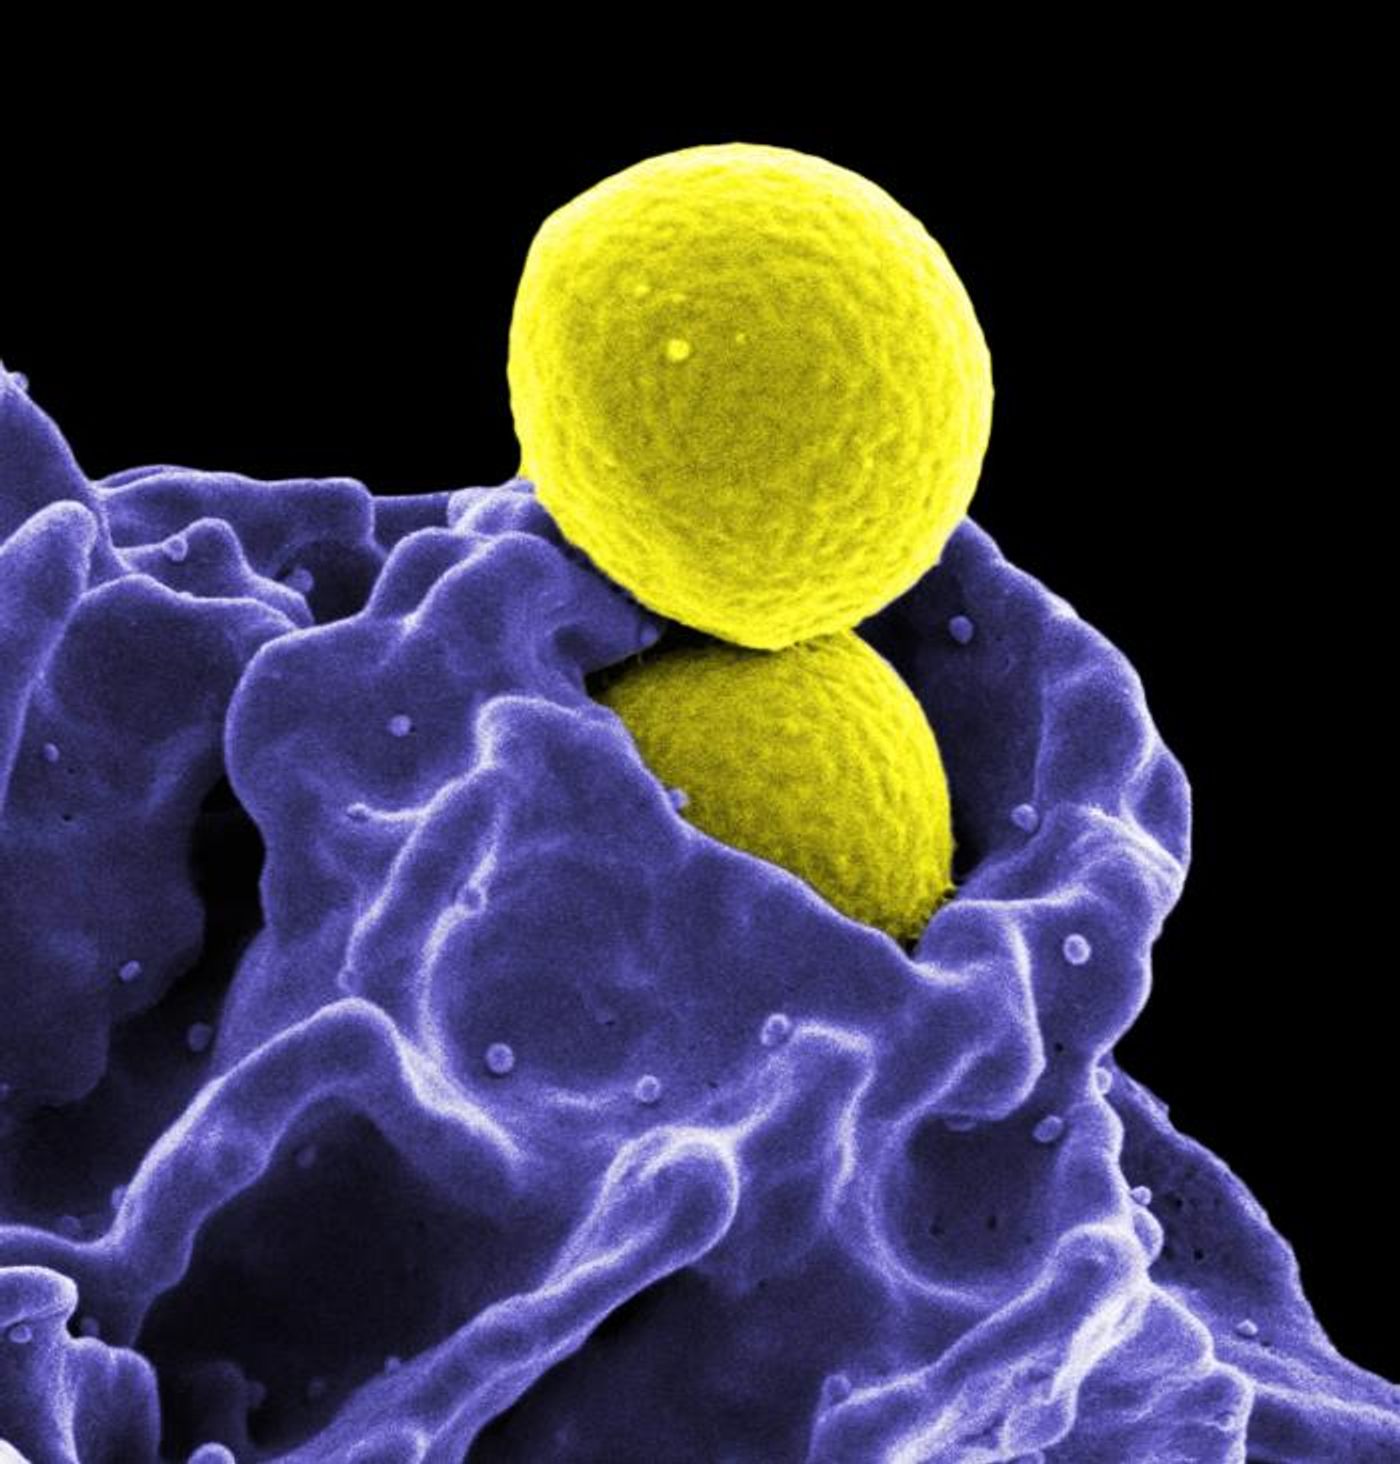 Two yellow-colored, spherical methicillin-resistant, Staphylococcus aureus (MRSA) bacteria, in the process of being phagocytized by a blue-colored human white blood cell (in this case, a neutrophil)./ Credit: National Institute of Allergy and Infectious Diseases